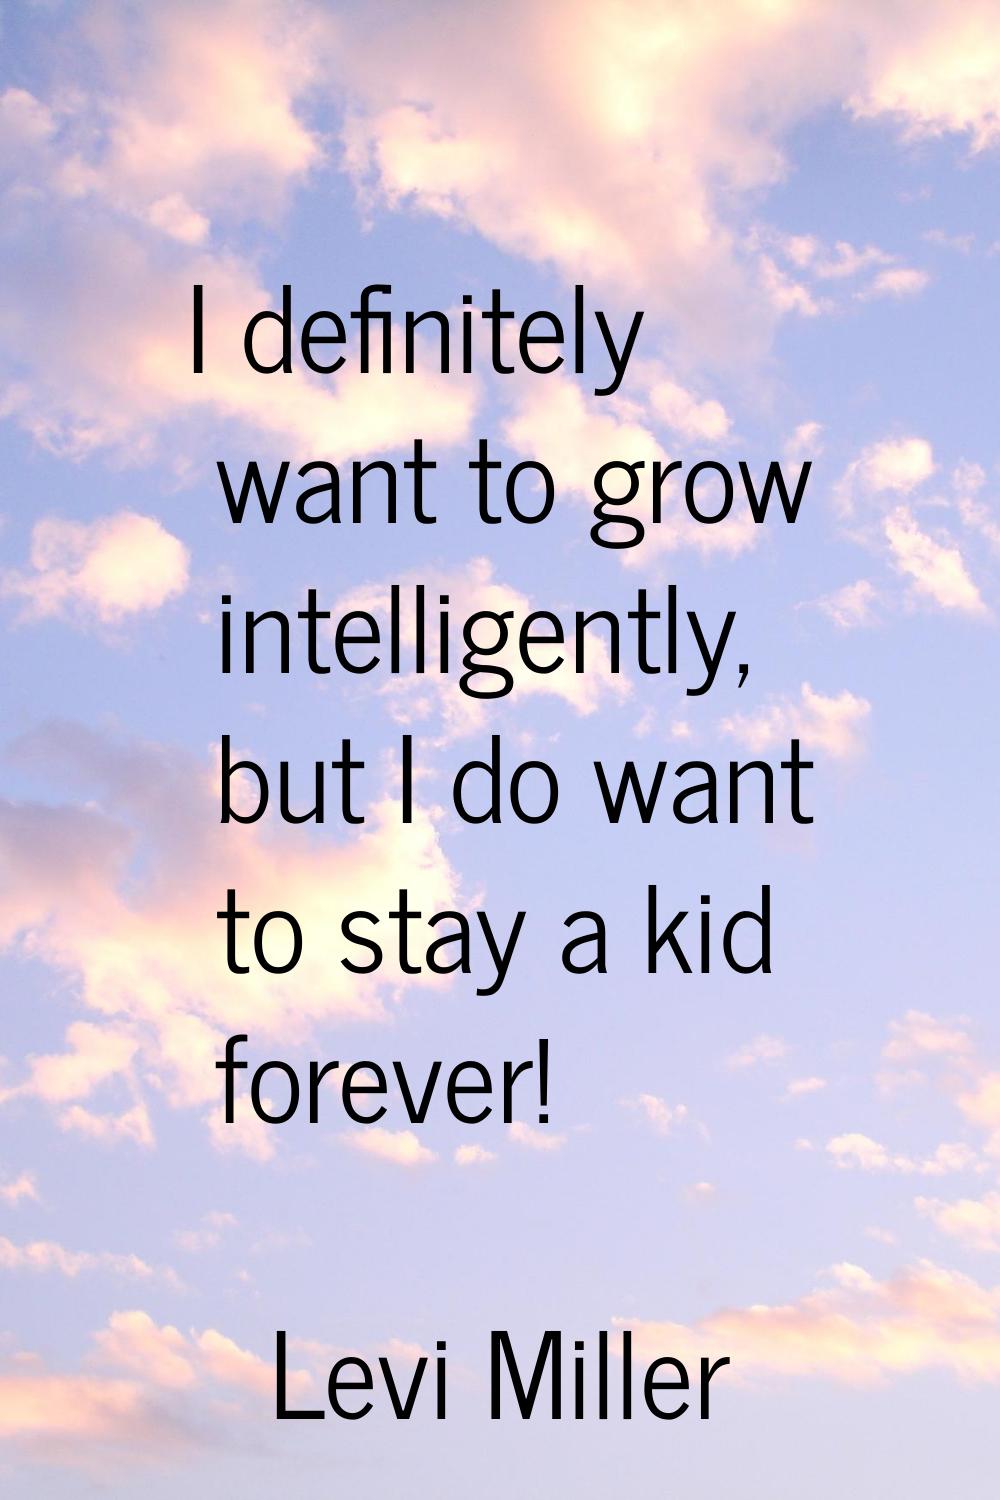 I definitely want to grow intelligently, but I do want to stay a kid forever!